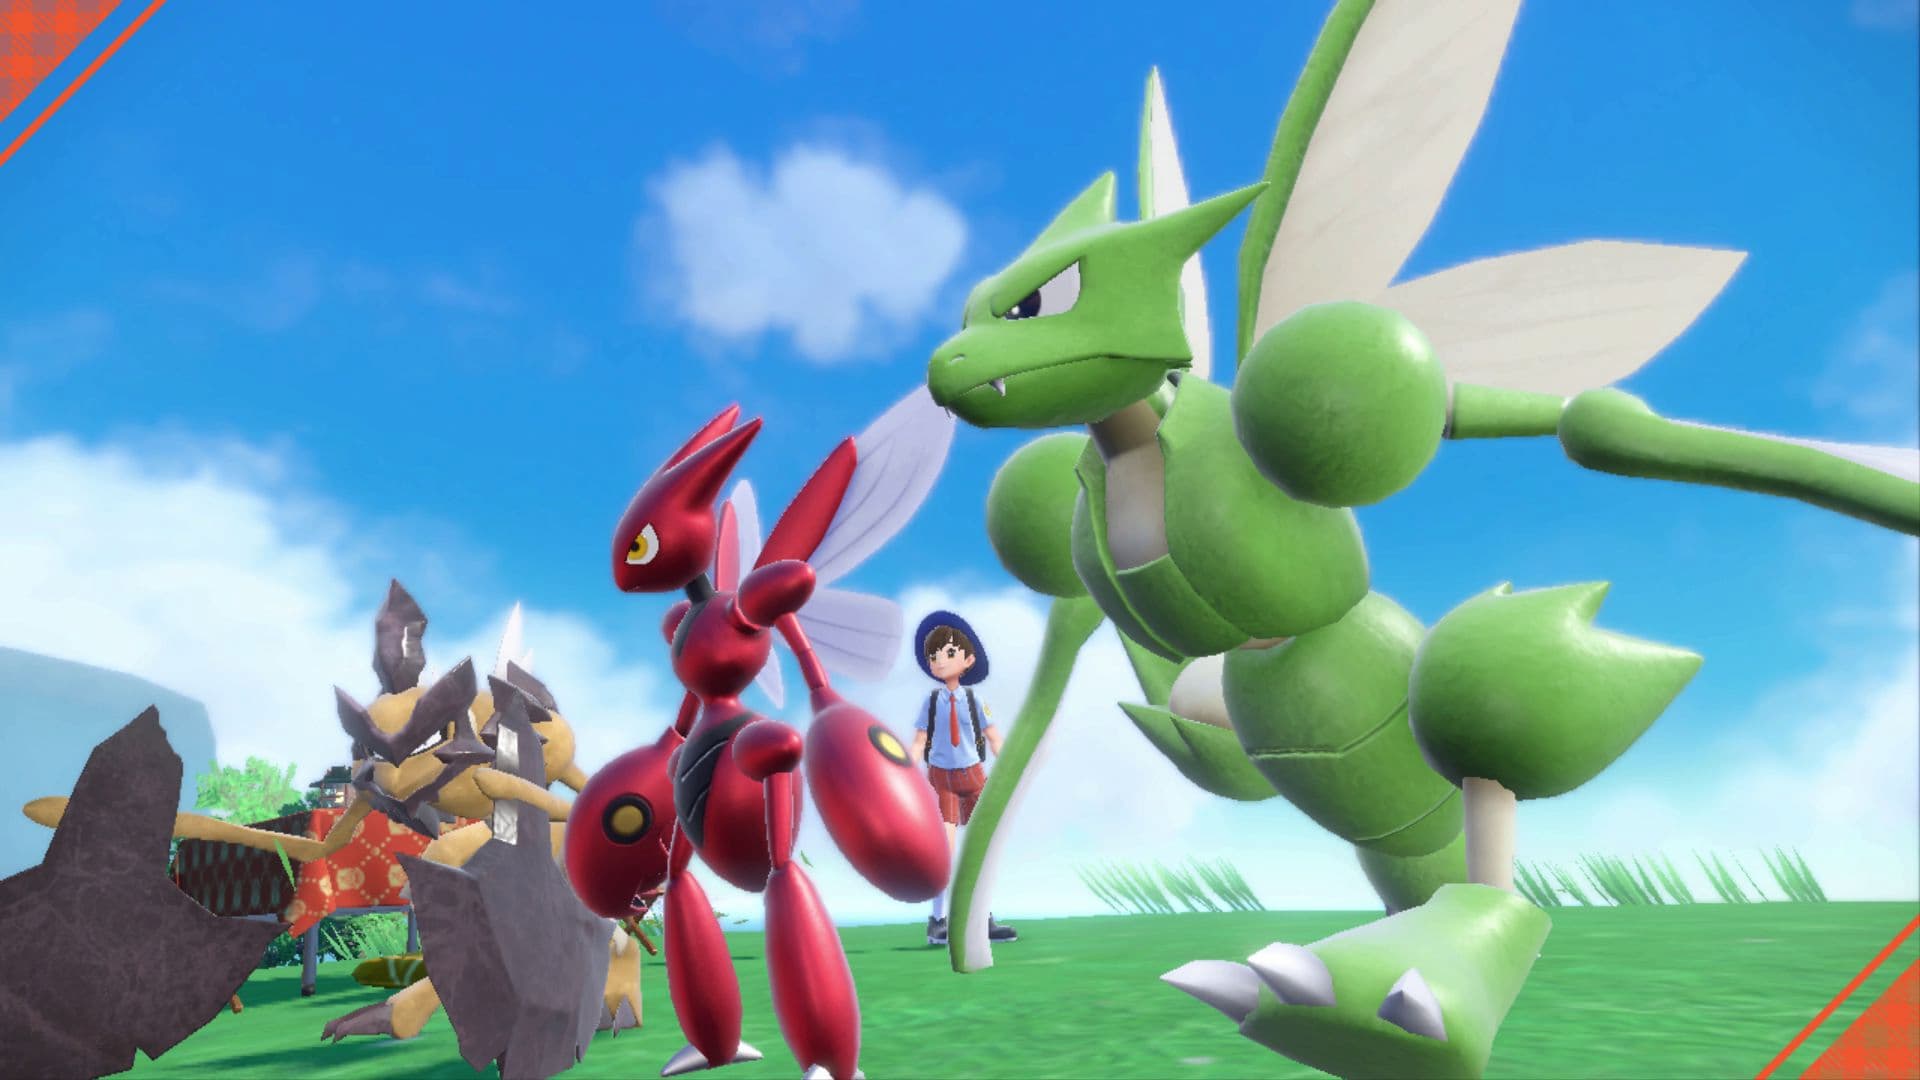 Nintendo Switch Online's new Pokemon game doesn't really address